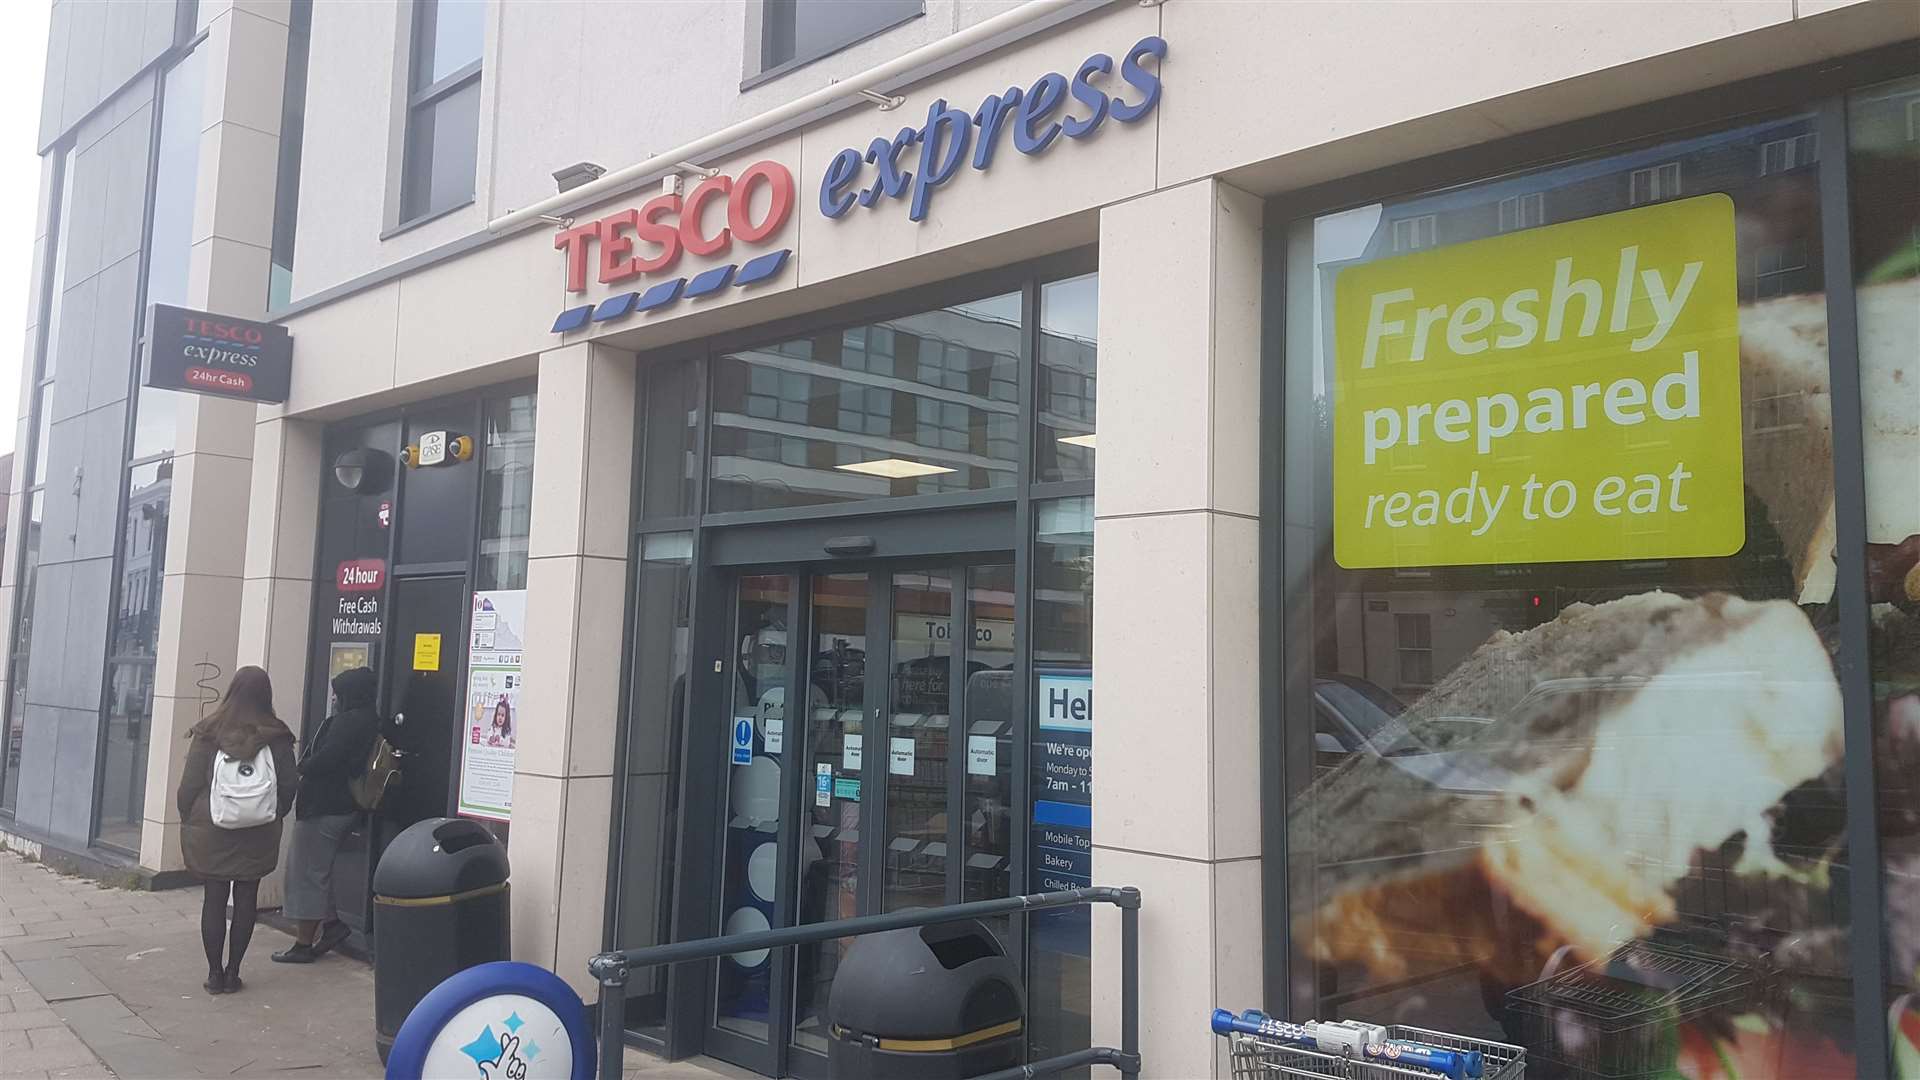 The Tesco Express in New Dover Road